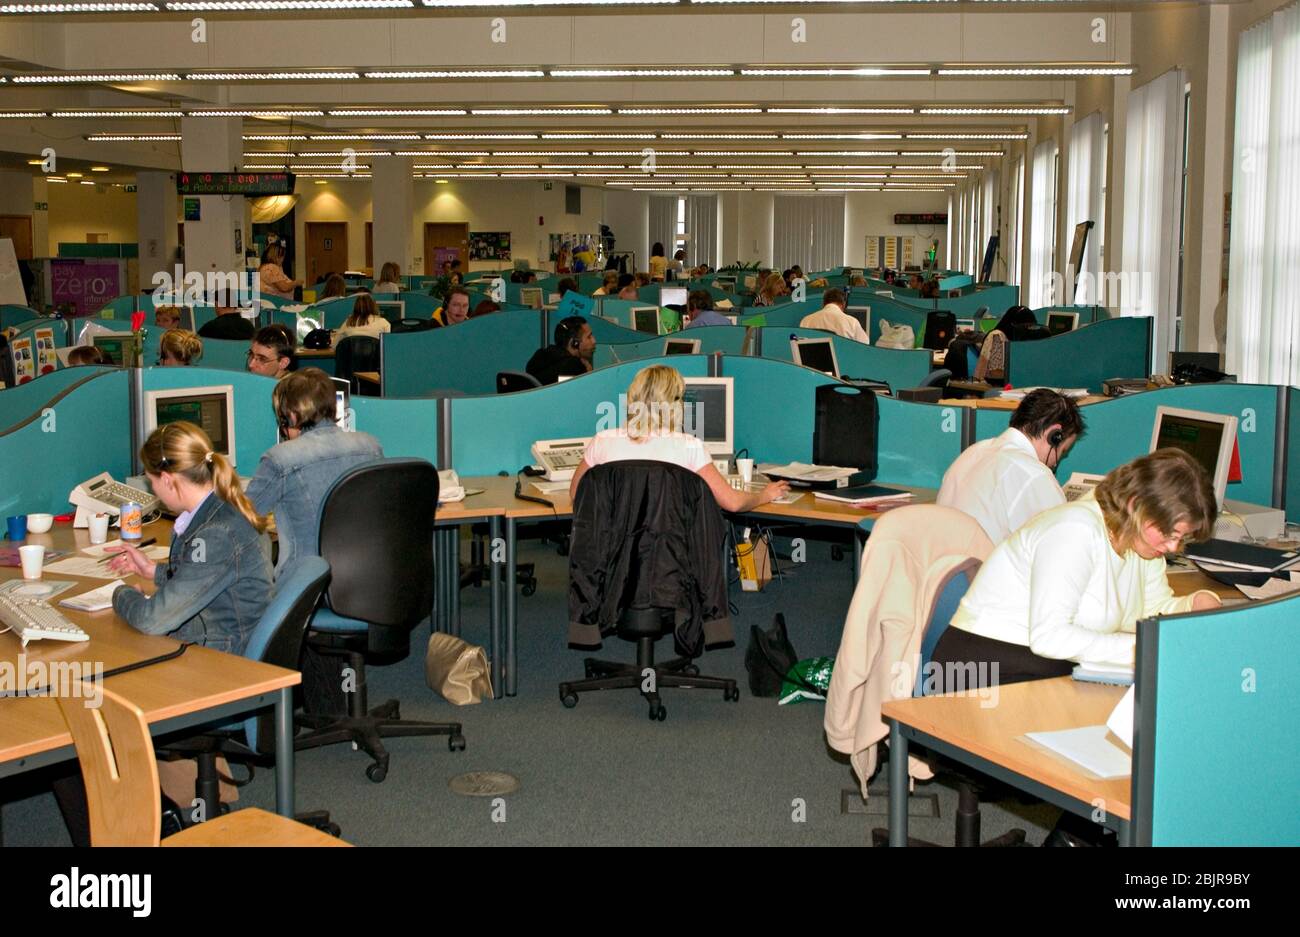 Workers at bank call centre due to be outsourced to India making UK staff redundant North East England 2004 Stock Photo